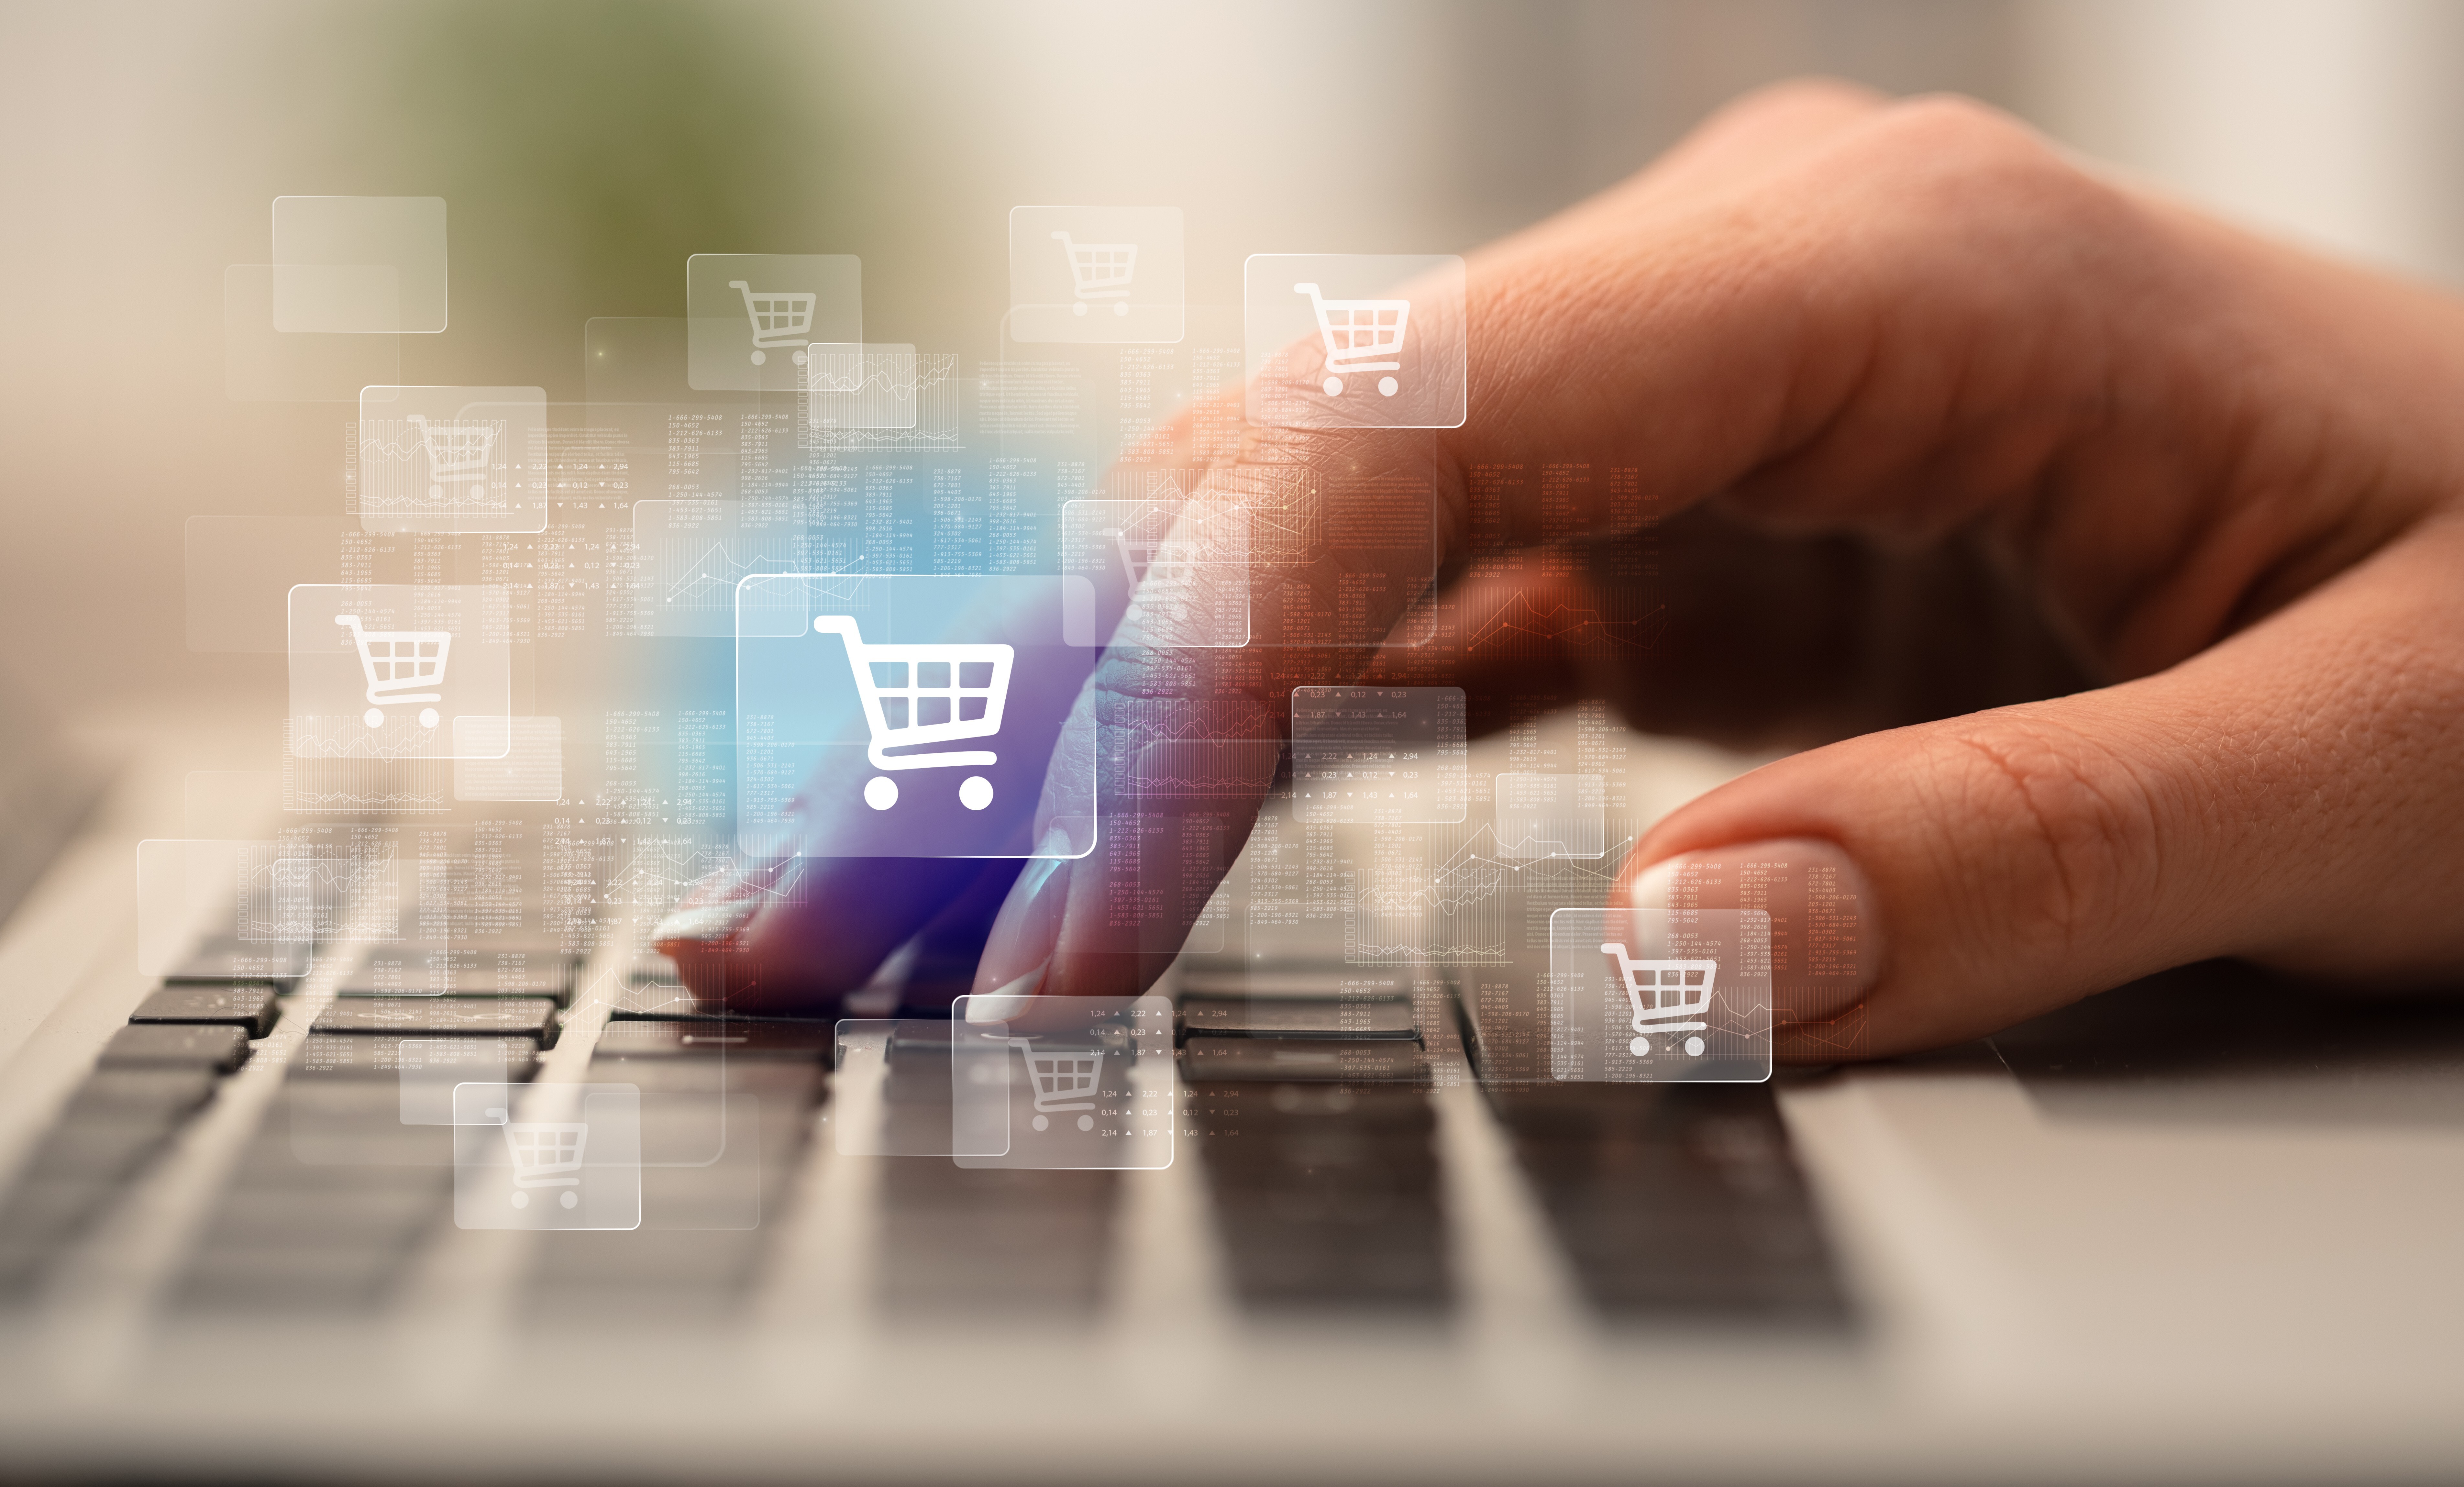 The pandemic has driven Hongkongers to fully embrace online shopping, industry leaders say. Photo: Shutterstock